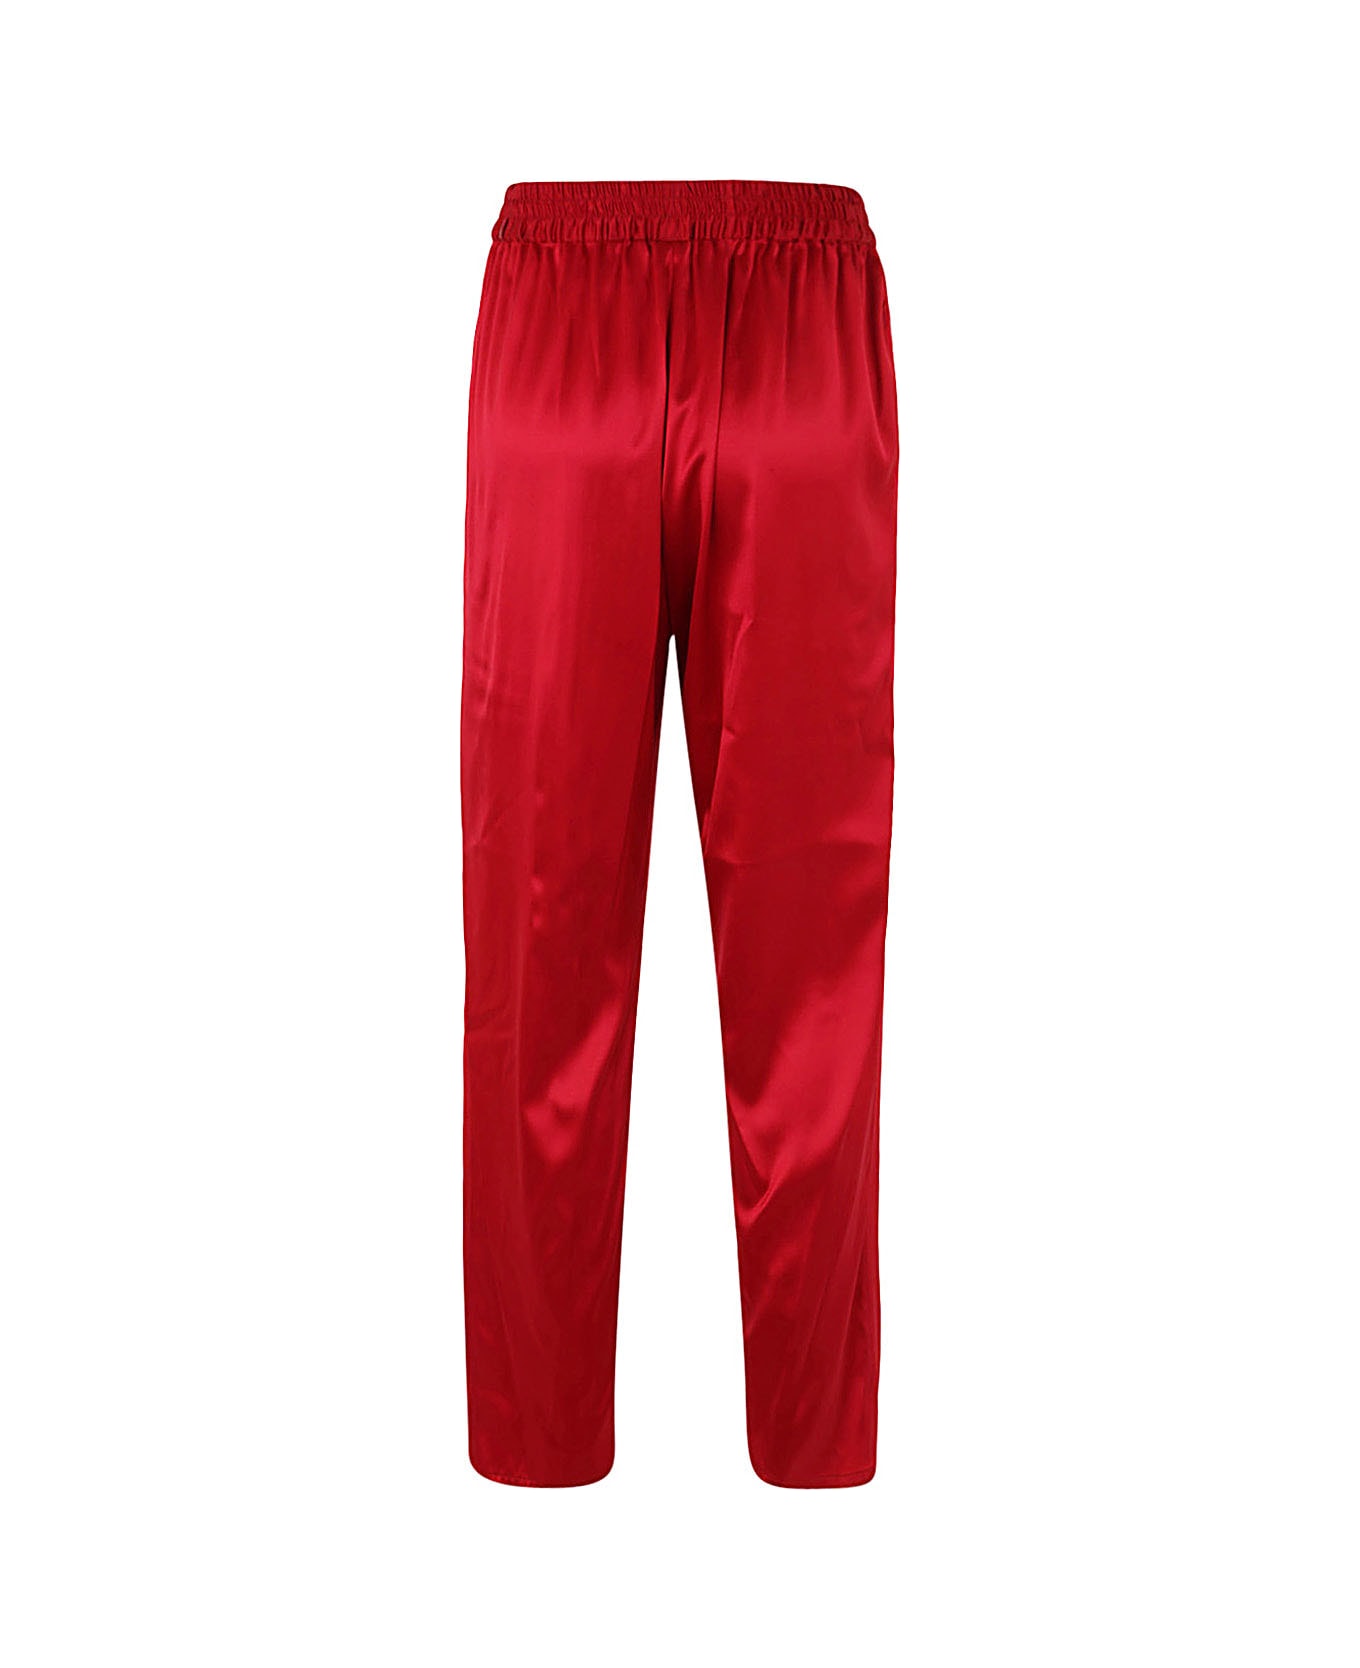 Gianluca Capannolo Mila Slim Trouser With Elastic - Pink ボトムス